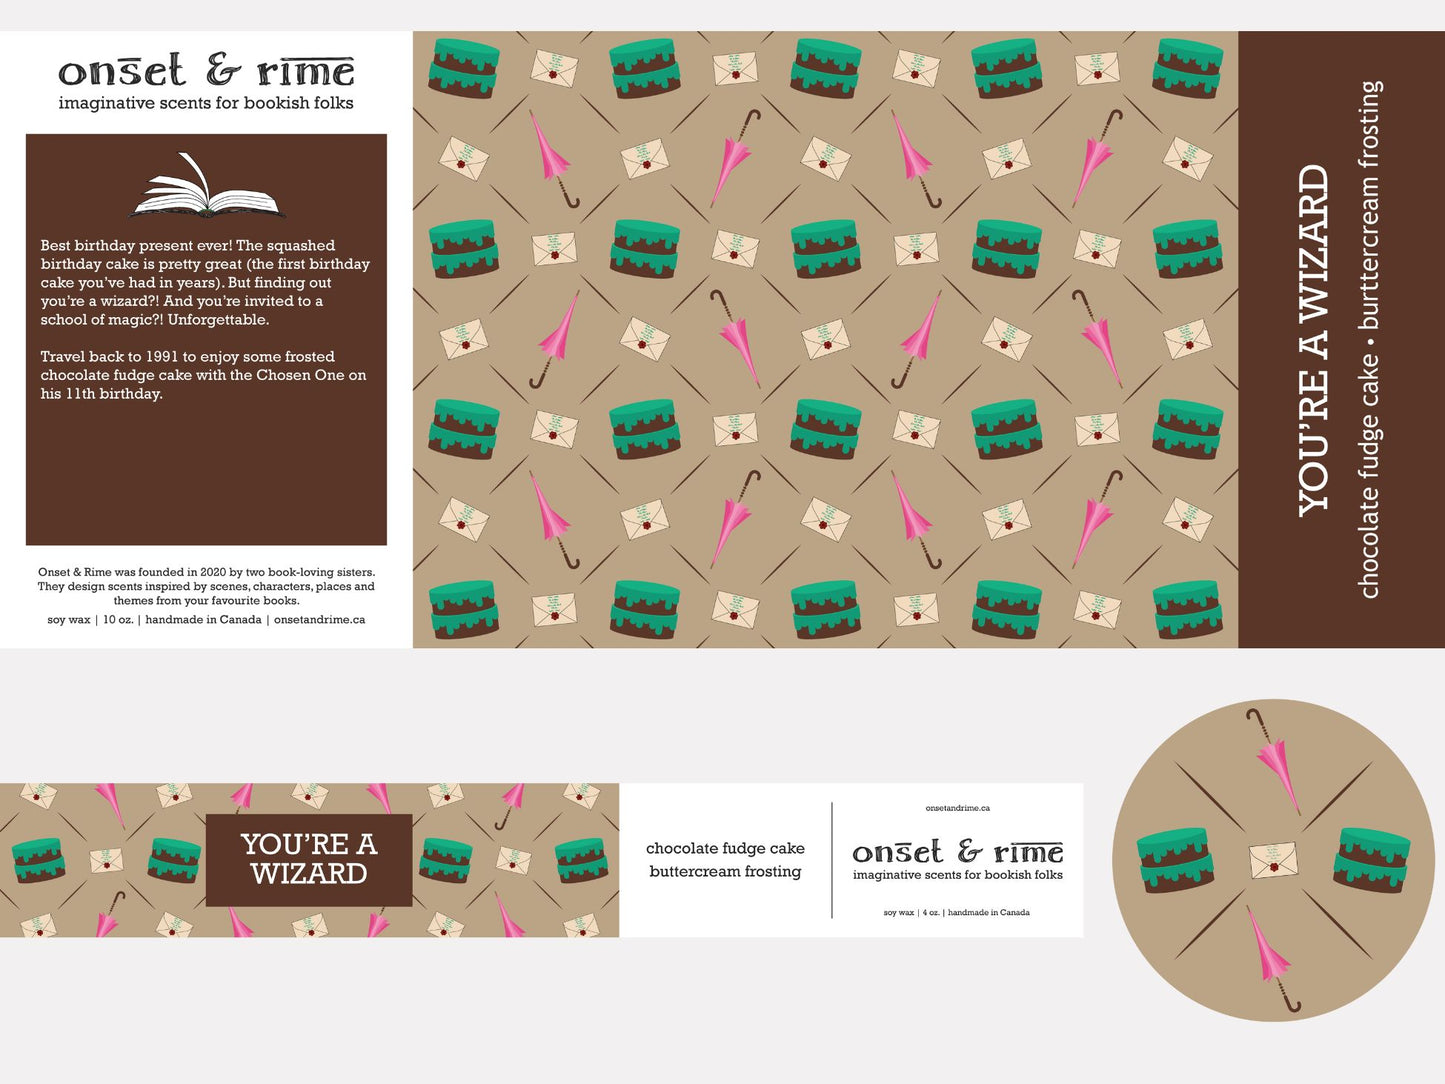 A close up view of the label for the Onset & Rime chocolate cake scented candle called "You're a Wizard". The label is light brown with a pattern of pink umbrellas, white envelopes, and chocolate cakes with green icing. The text on the label is "You're a Wizard - Chocolate Fudge Cake, Buttercream Frosting".